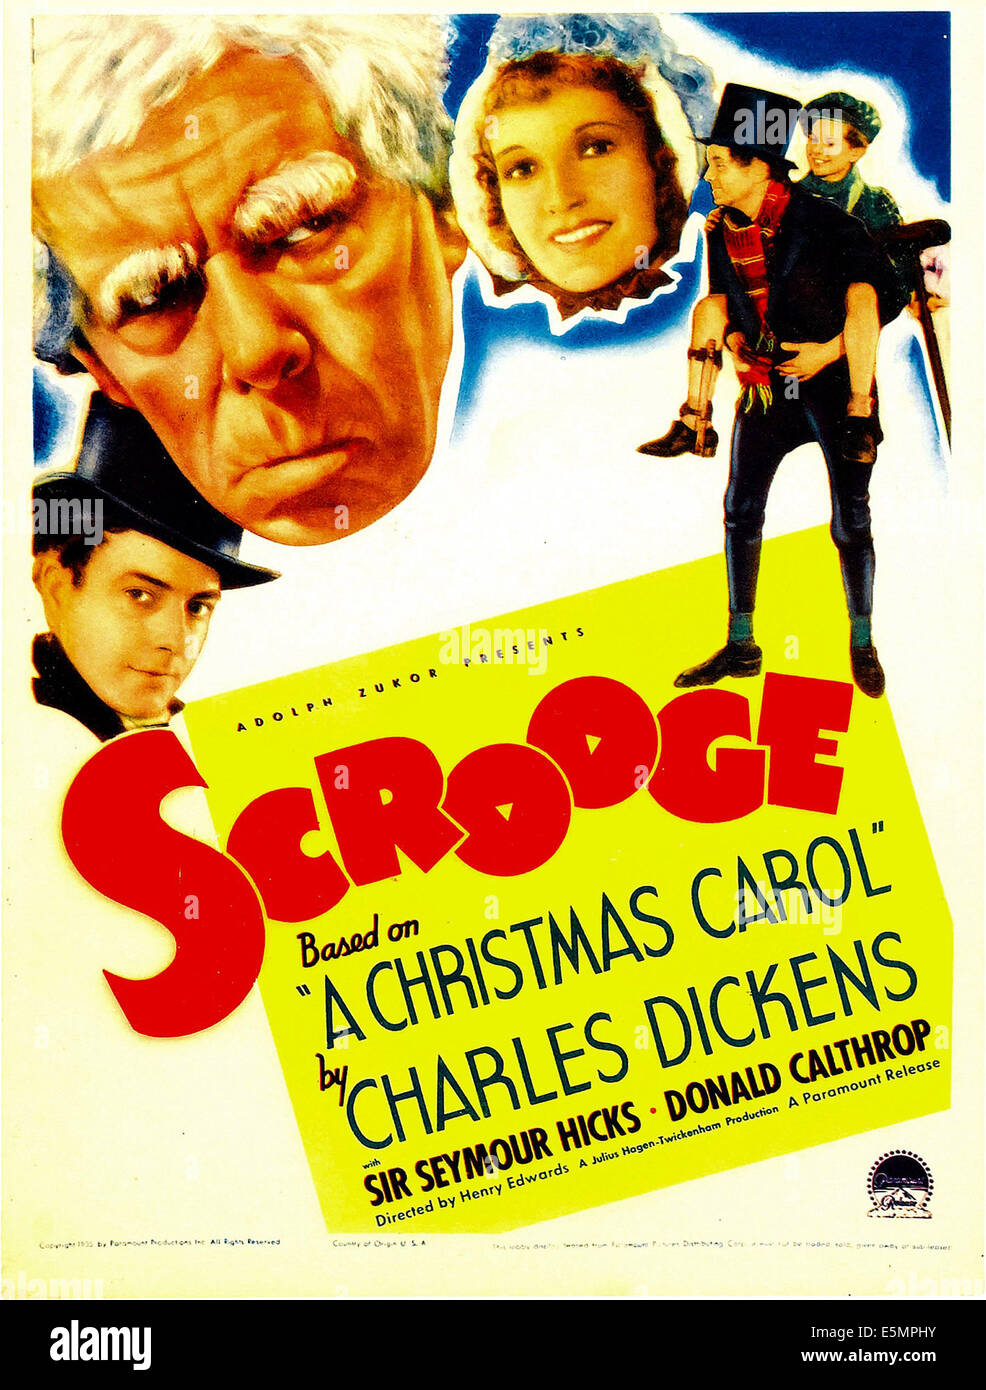 SCROOGE, second from left: Seymour Hicks on midget window card, 1935 Stock Photo